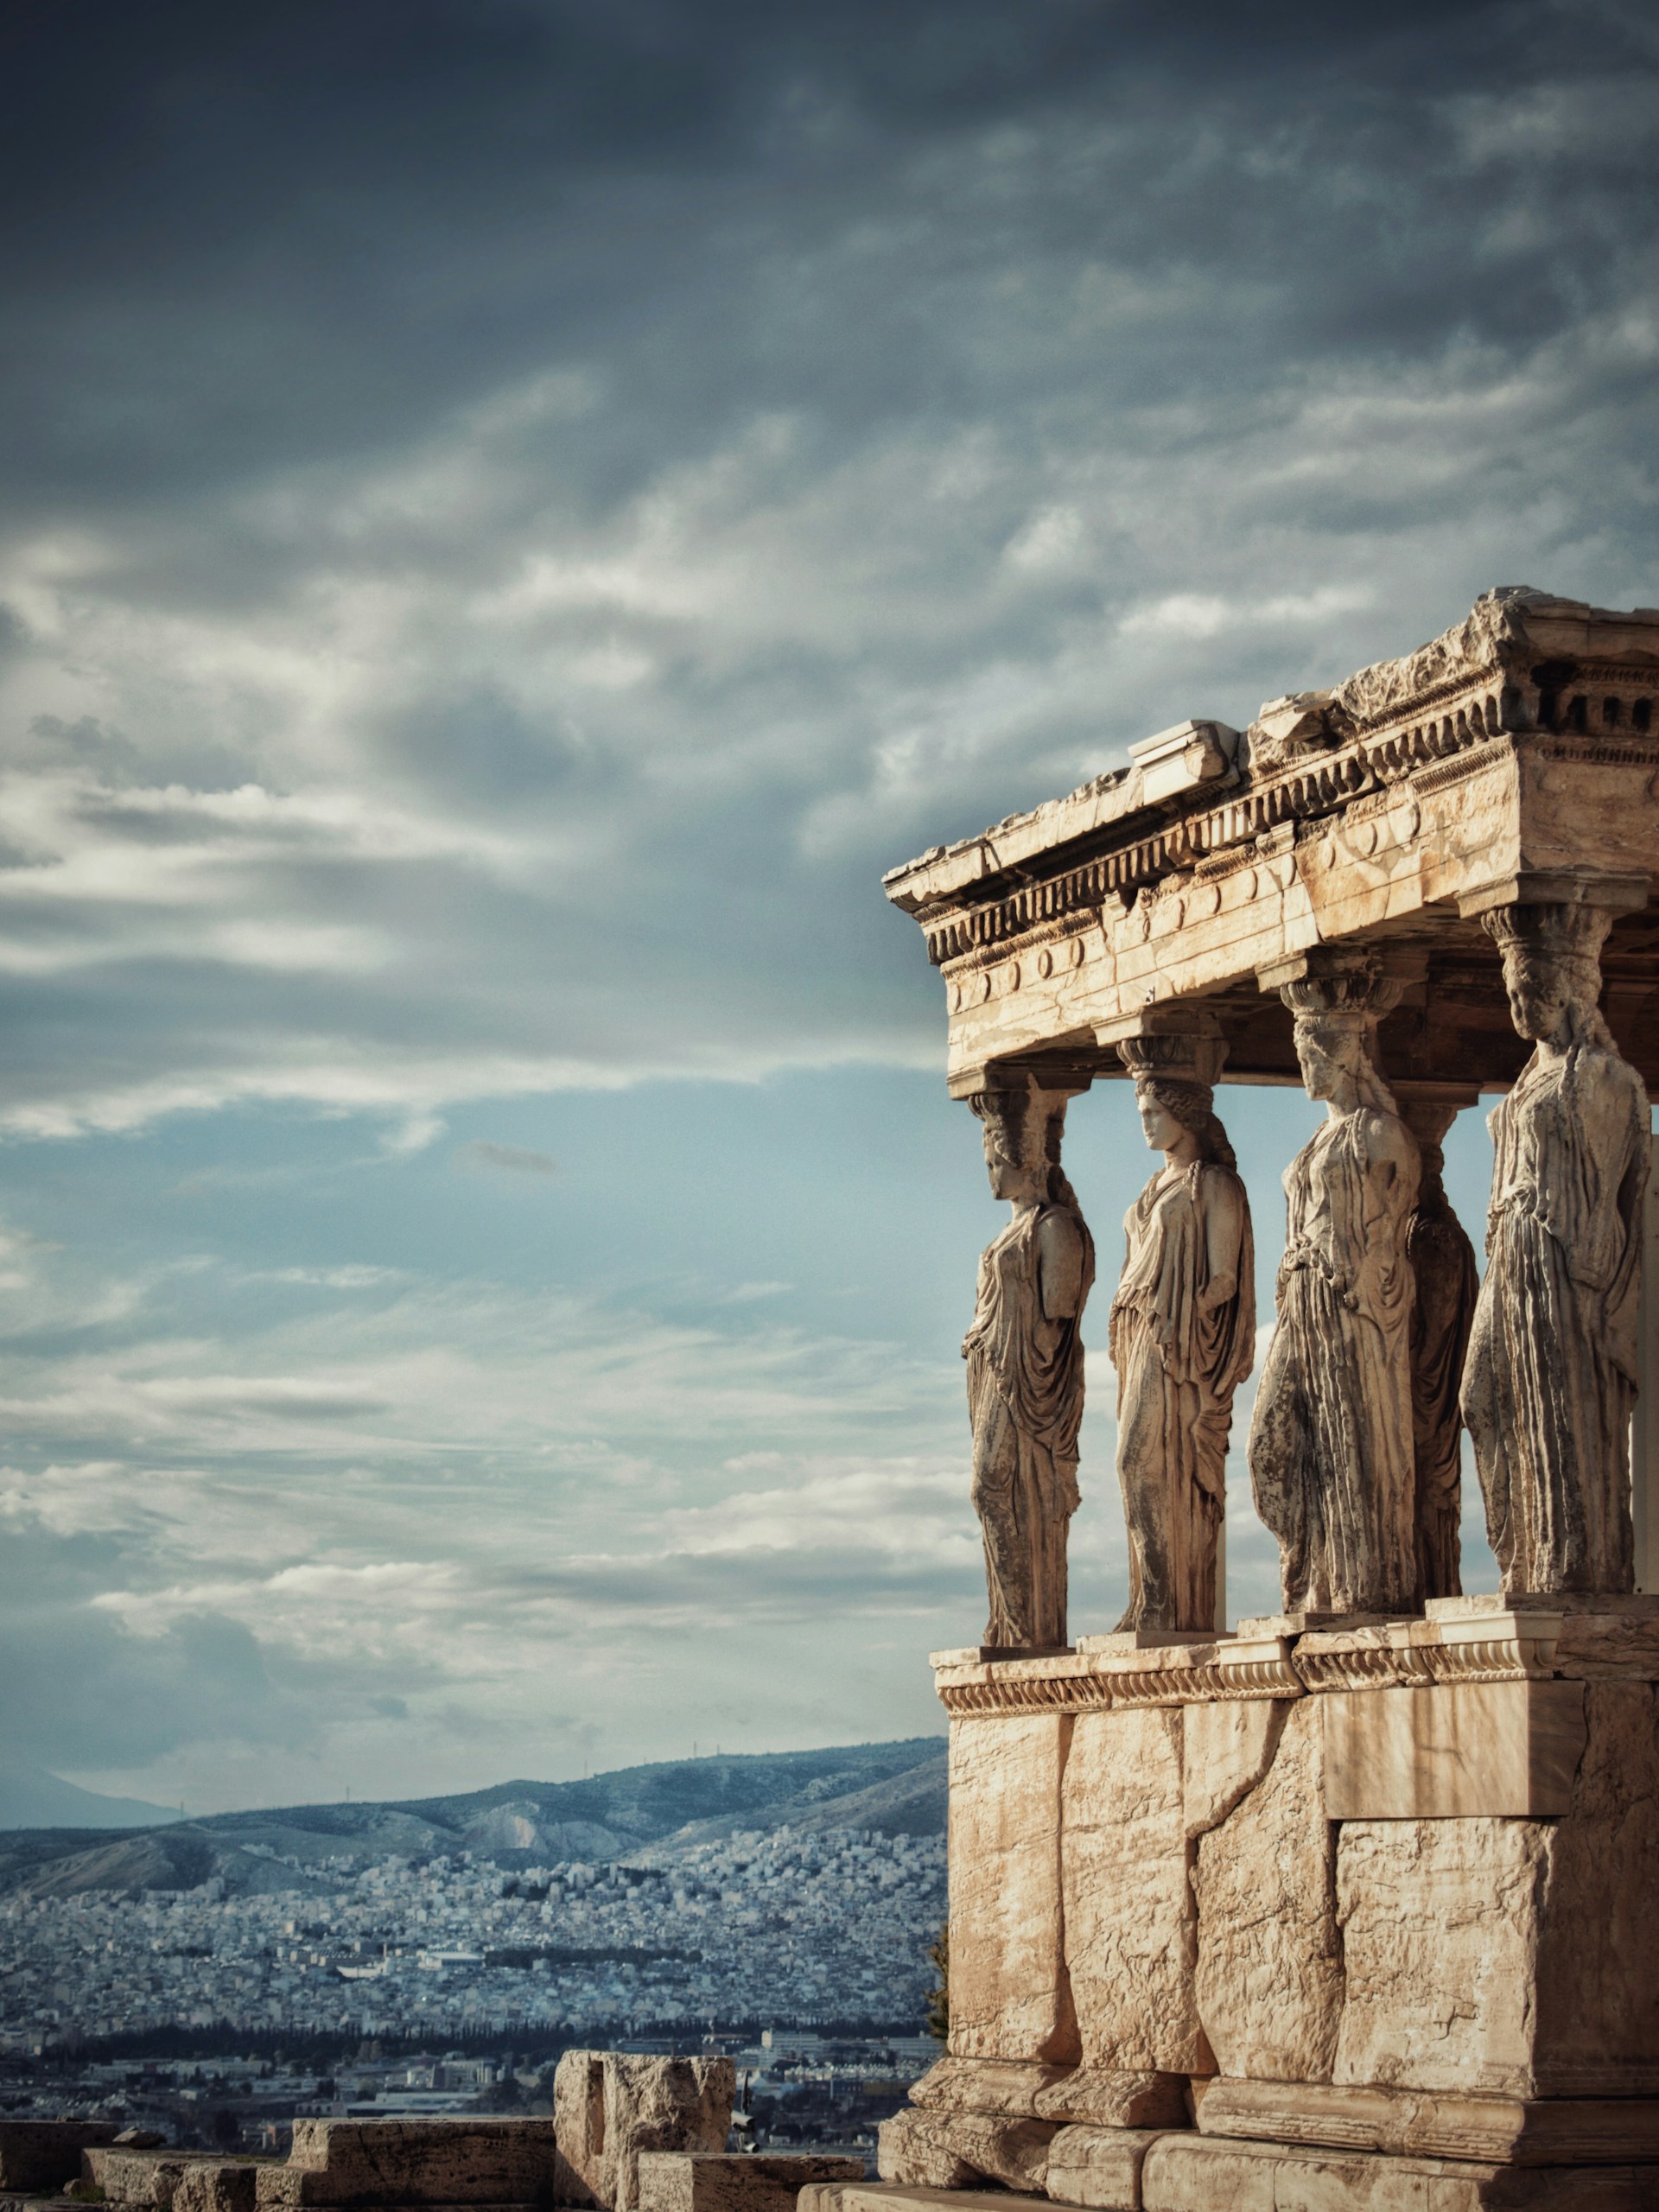 <p>Athens is home to many ancient structures like Acropolis and Parthenon that have fascinated history lovers worldwide. Tourists also come for the vibrant local markets, light food, and beautiful island views.</p>